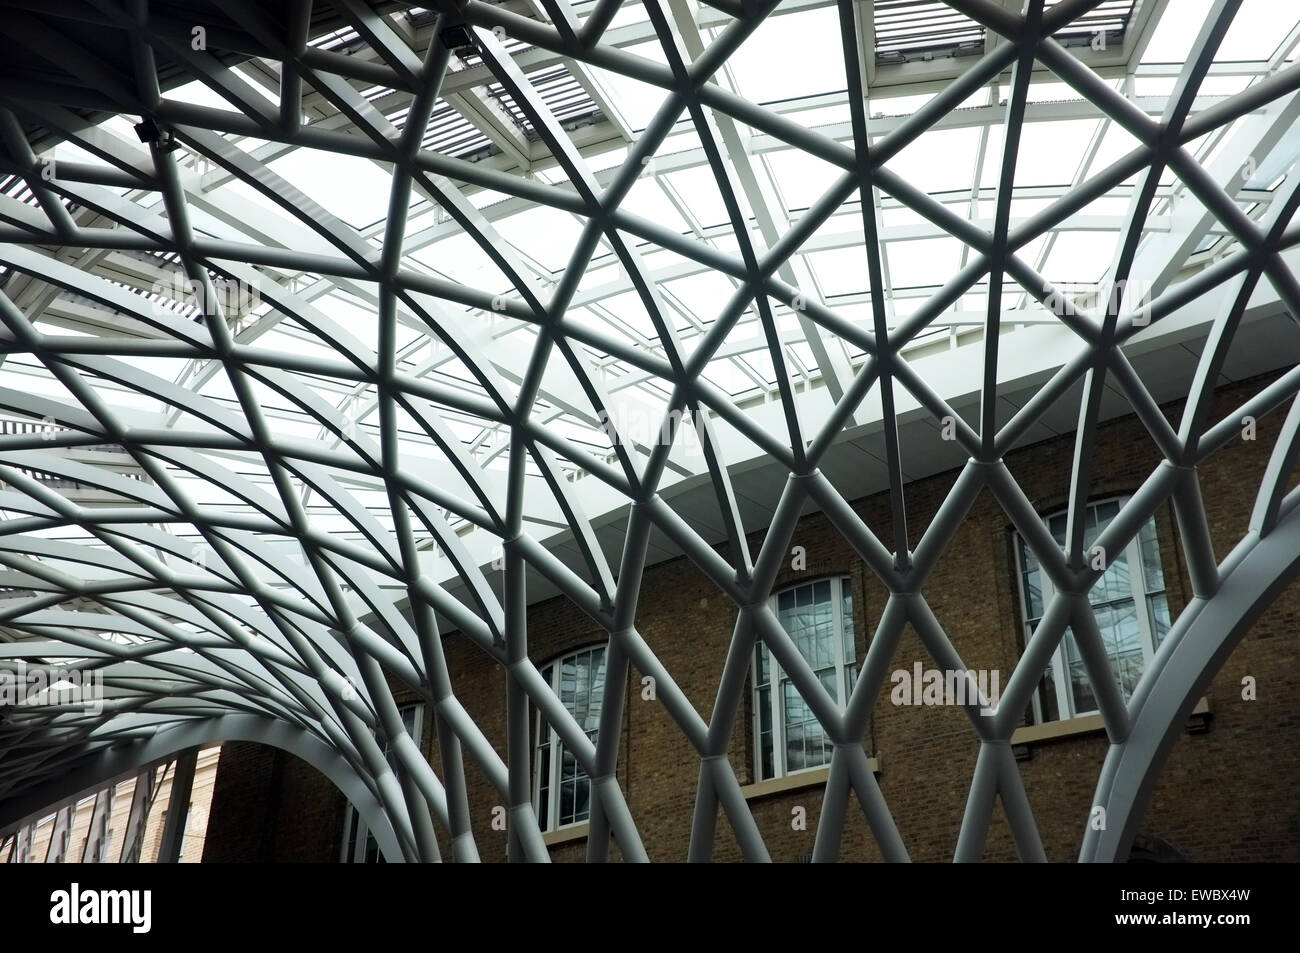 Ceiling of King's Cross Station Stock Photo - Alamy